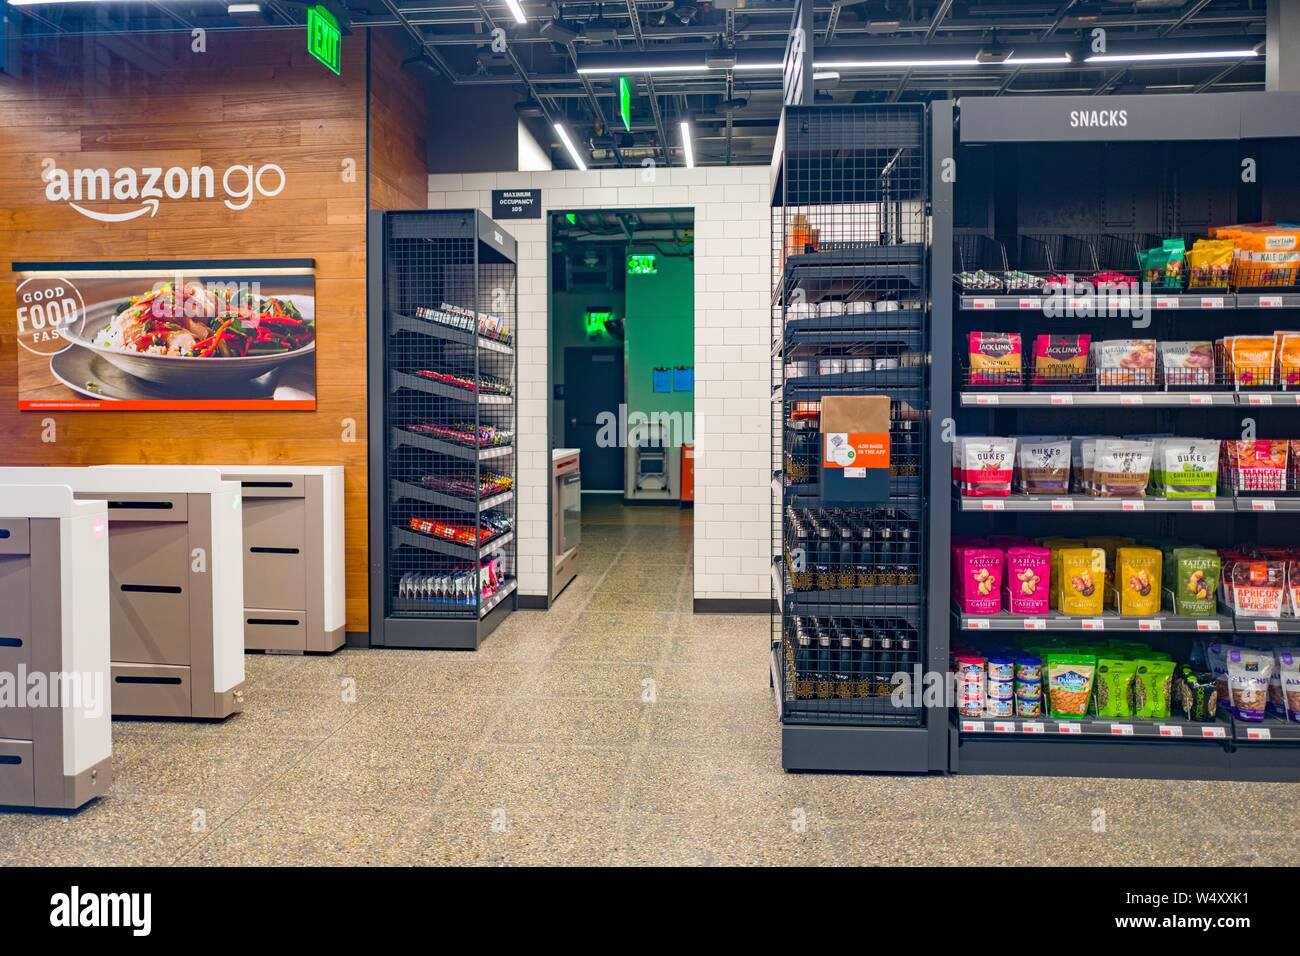 Empty interior with logo at Amazon Go concept store, a physical retail store operated by Amazon in which shoppers are able to take items from shelves and exit without a checkout process, having their items automatically charged to their Amazon Prime account, San Francisco, California; the store uses advanced machine vision and artificial intelligence technologies to automatically record purchases, December 25, 2018. () Stock Photo